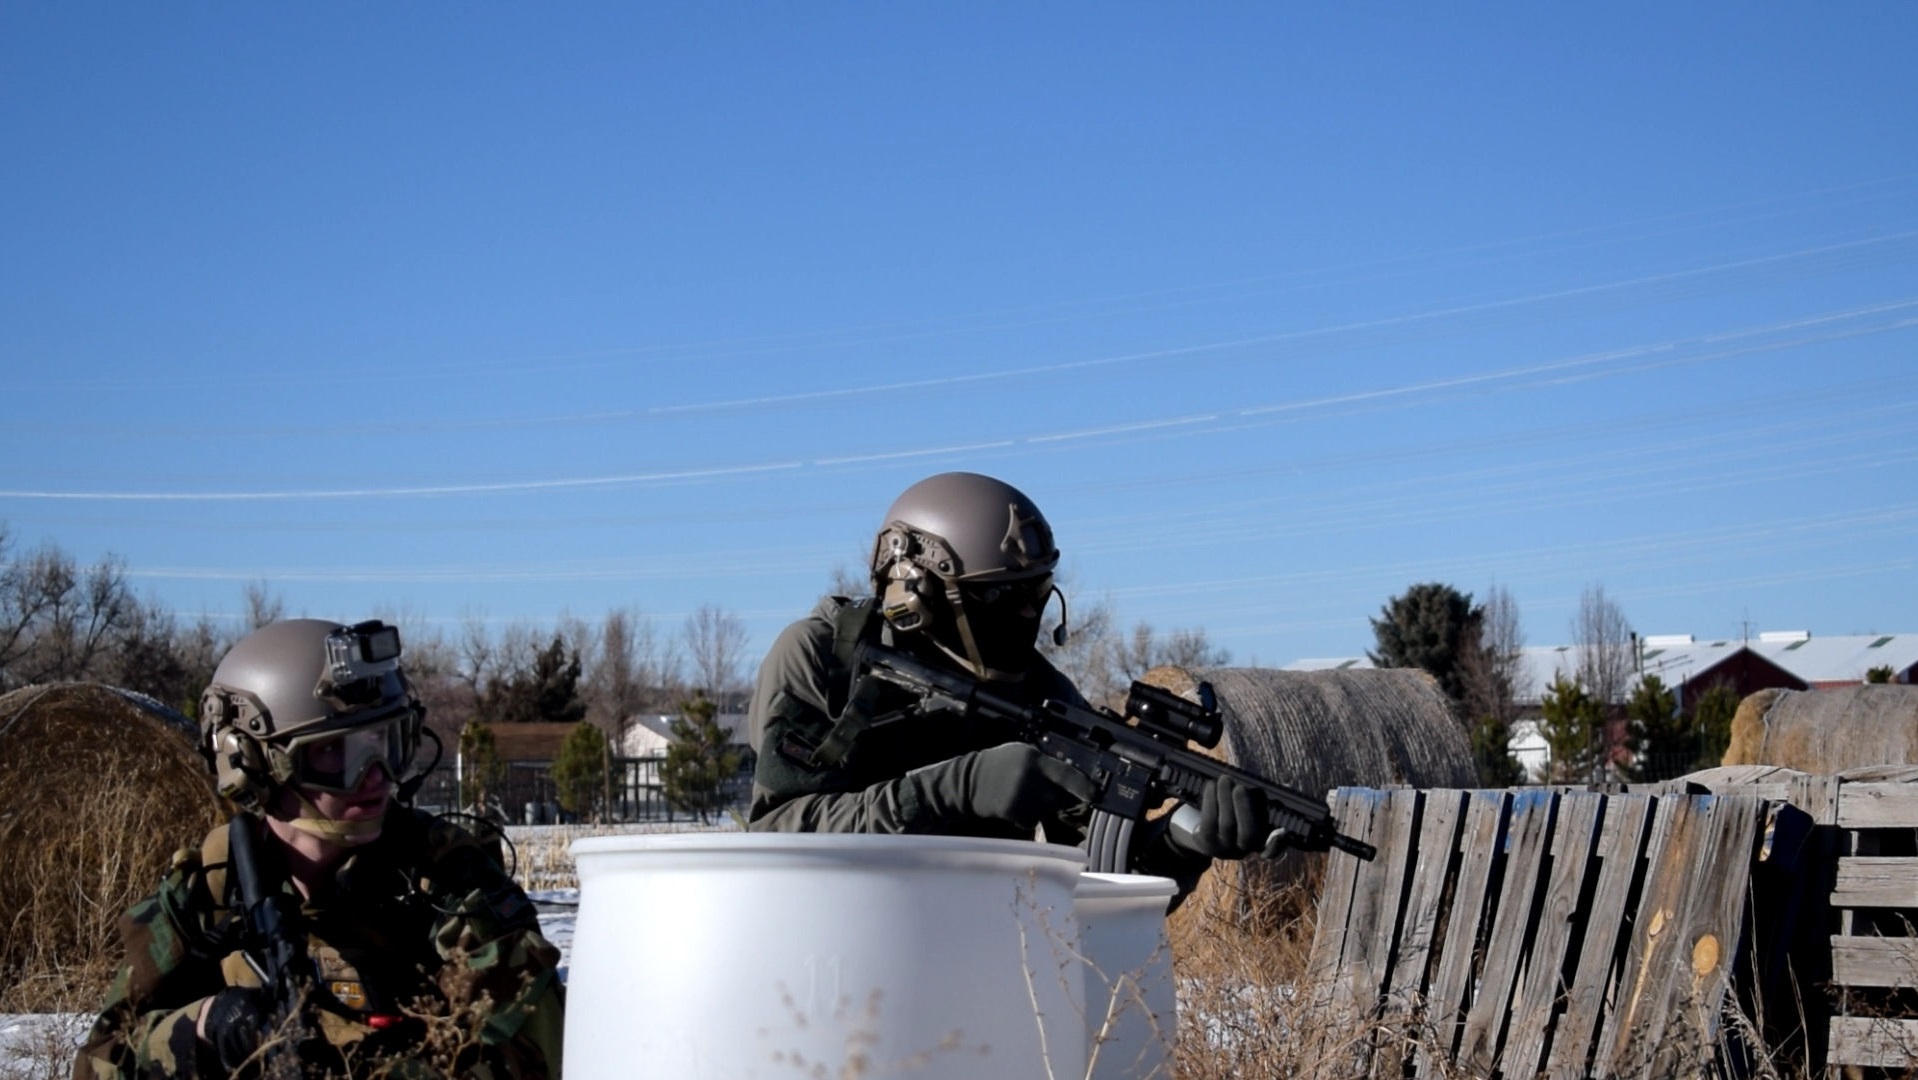 Two airsoft players in helmets and tactical gear taking positions behind cover in an outdoor field with clear skies above.